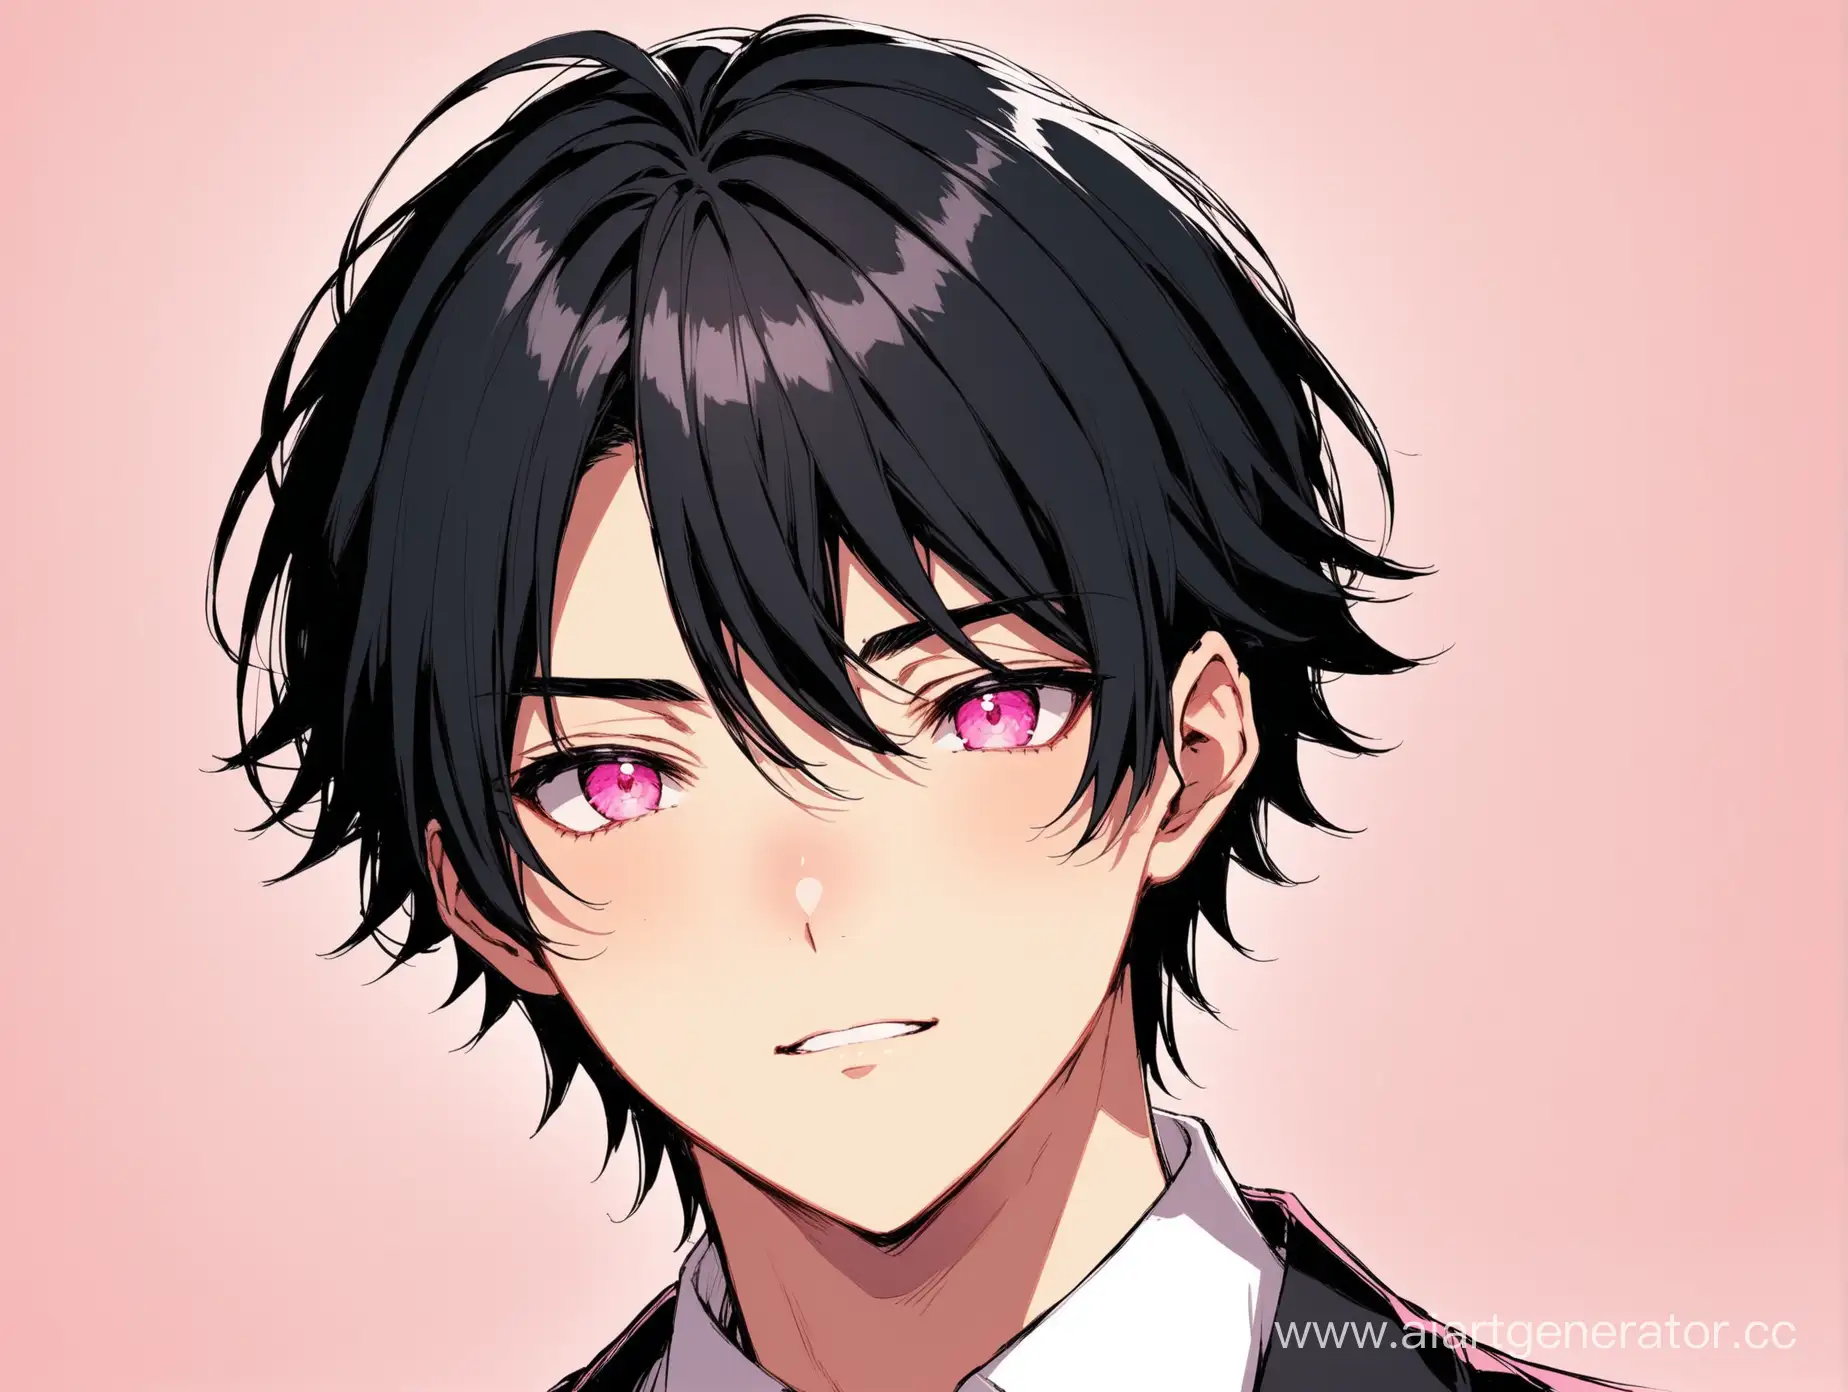 Male-Student-with-Black-Hair-and-Pink-Eyes-at-School